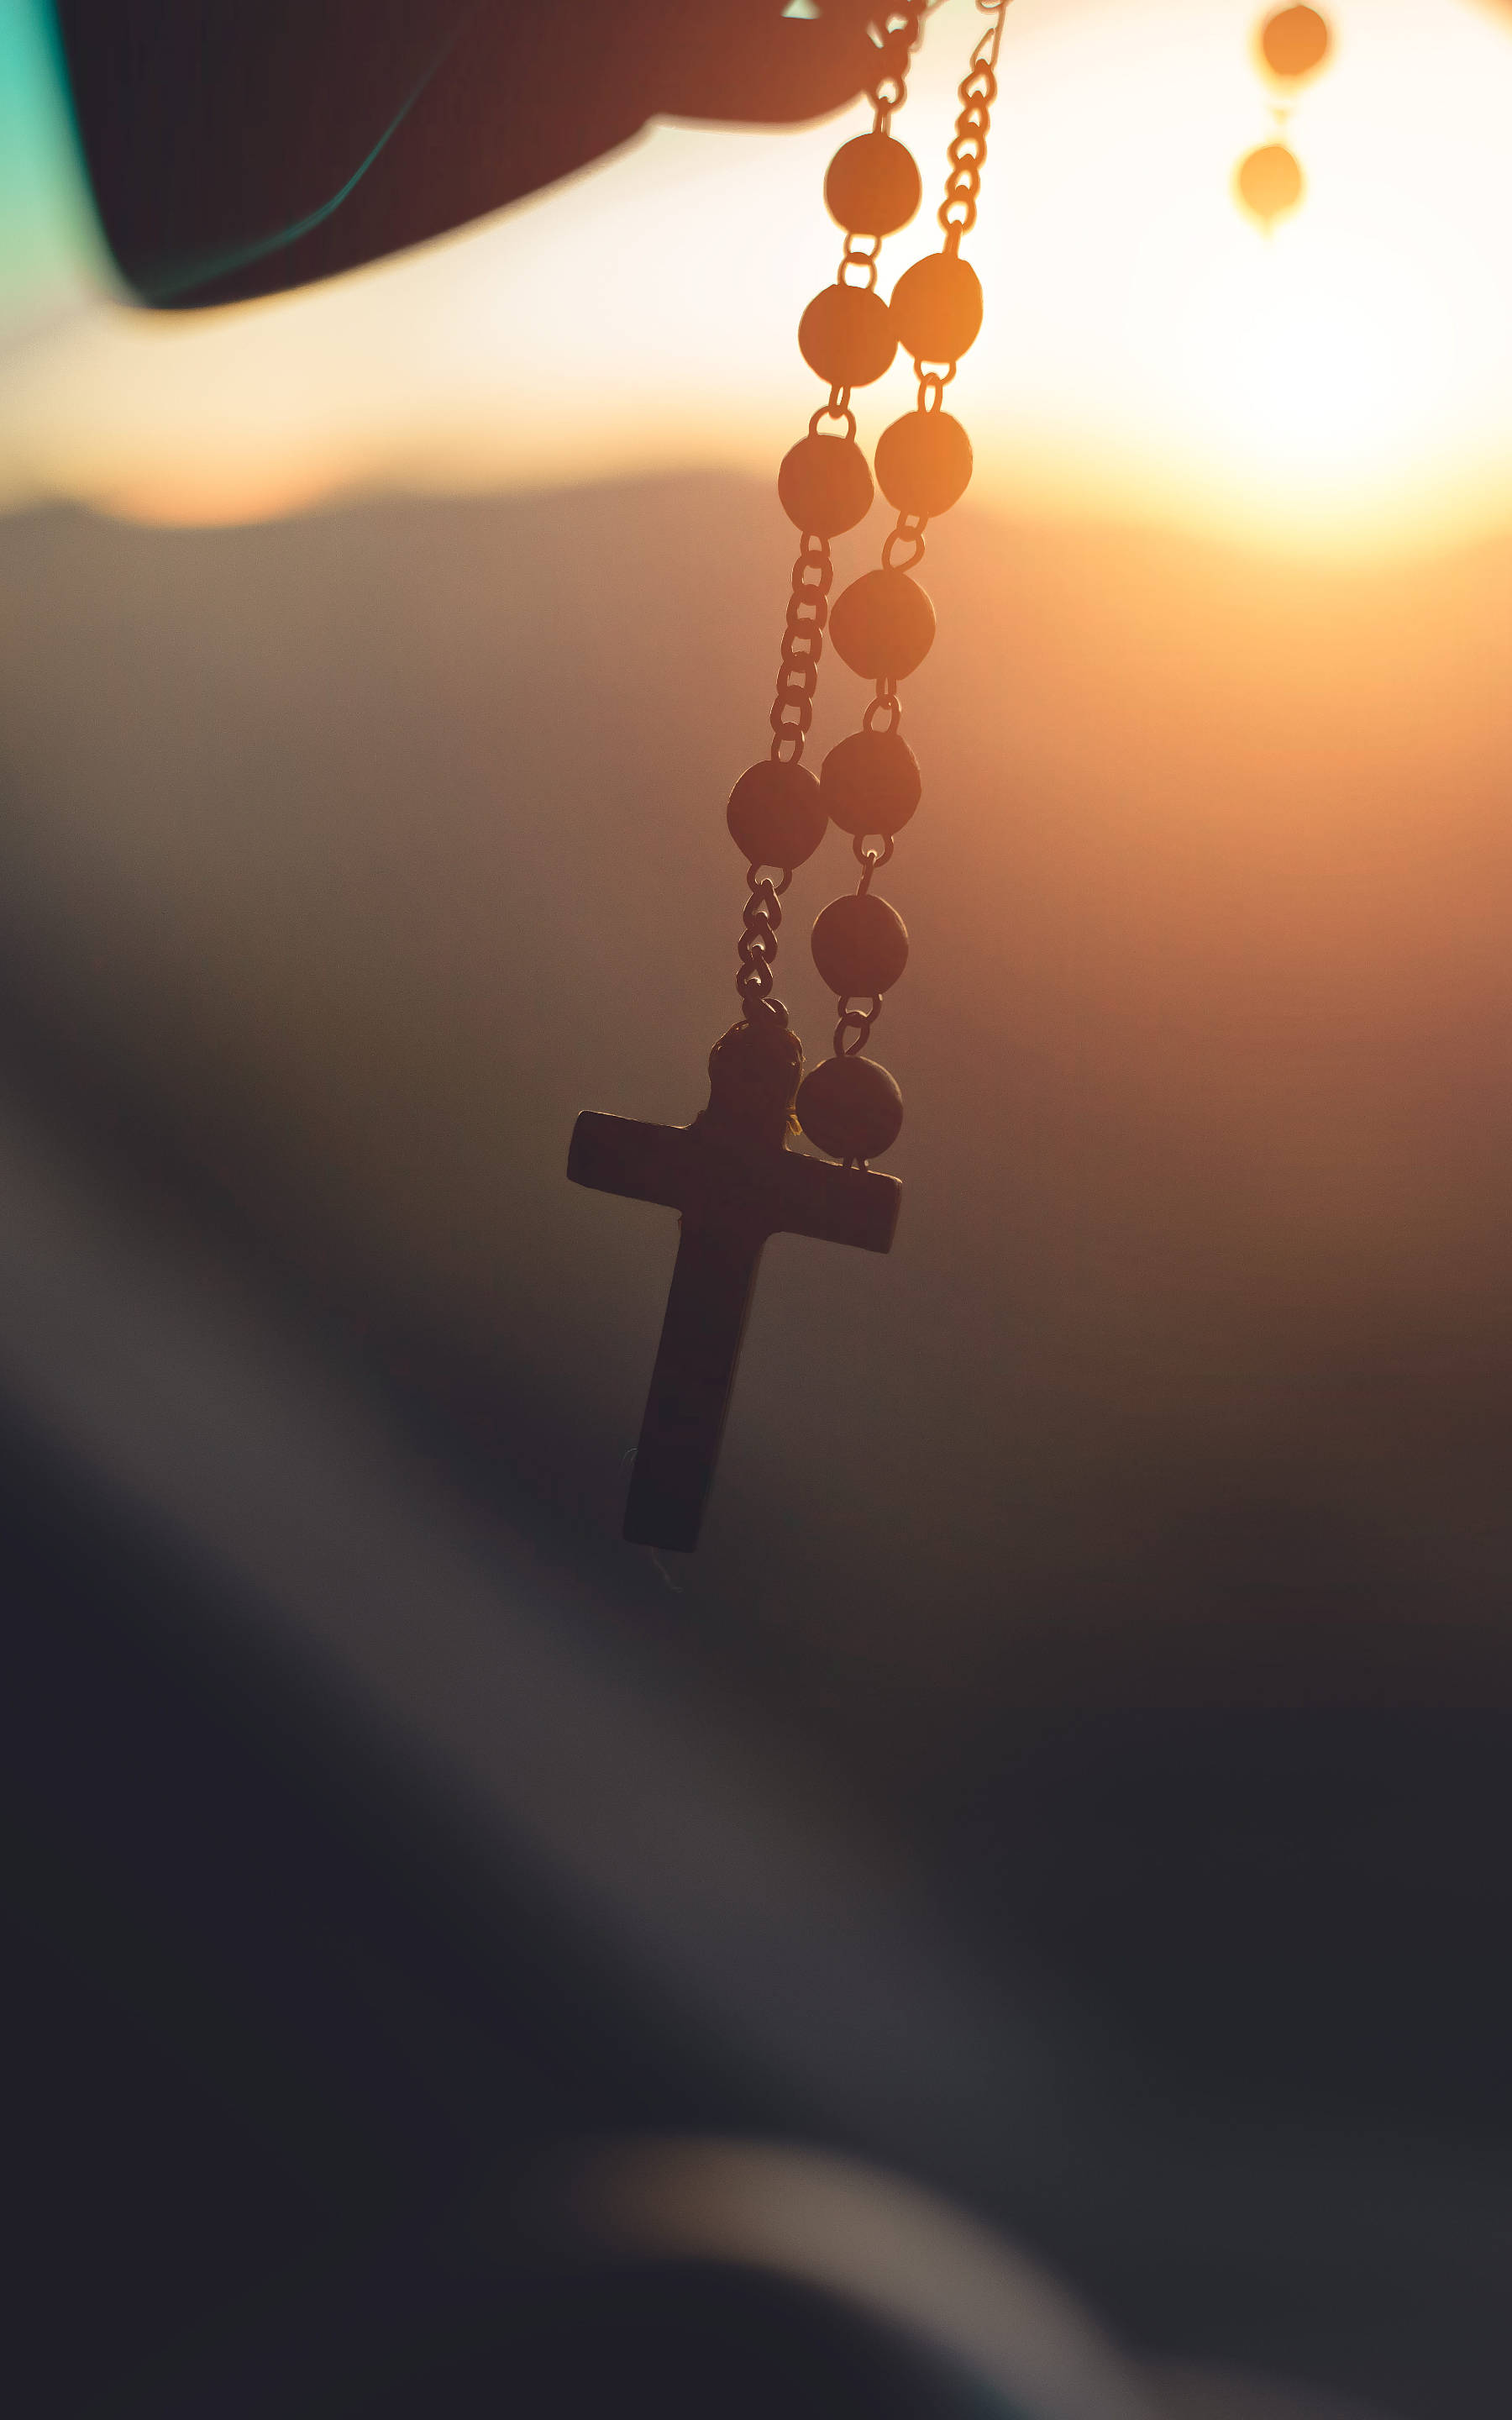 Download Holy Catholic Rosary Wallpaper 